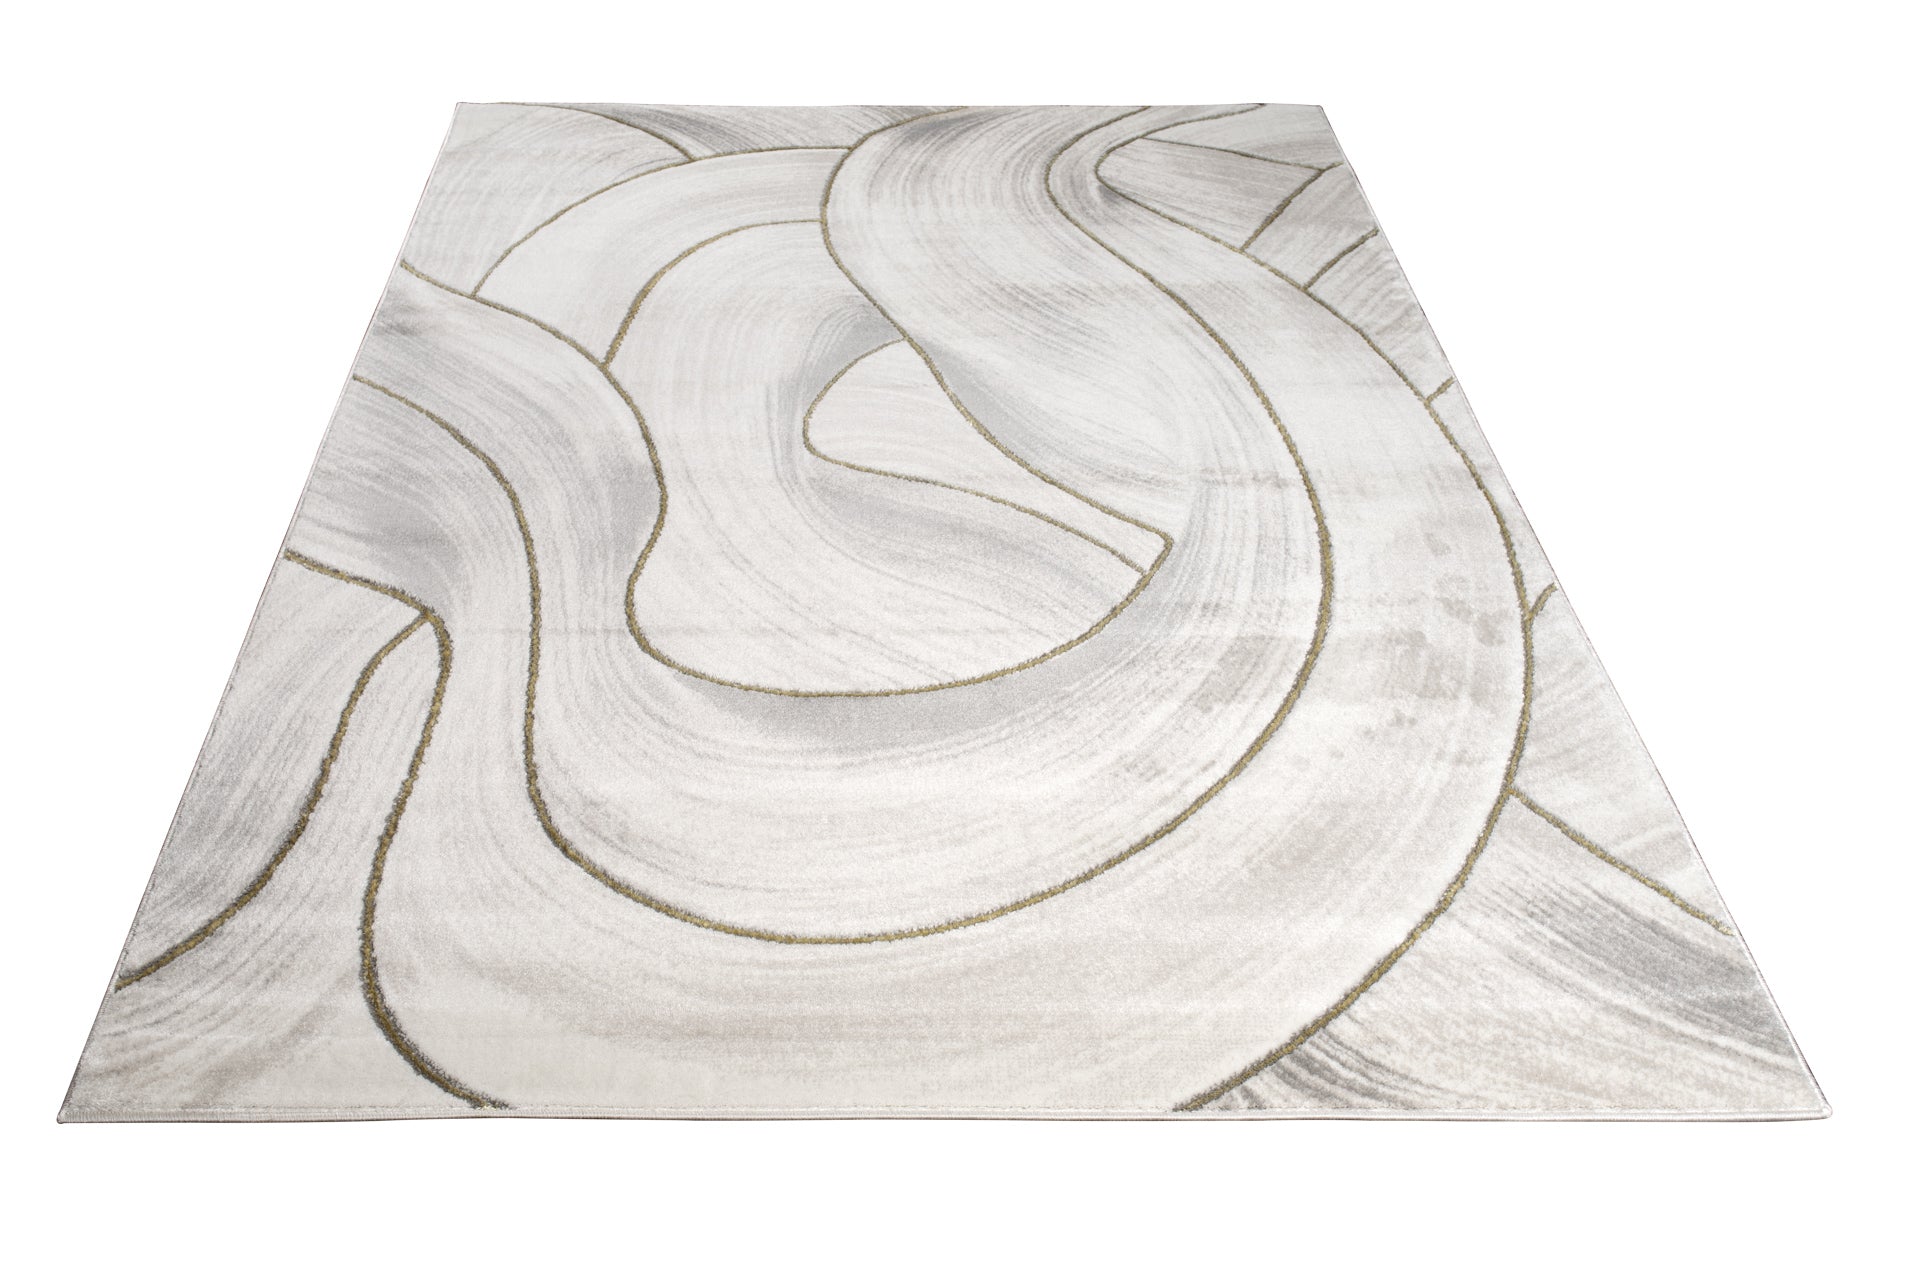 grey gold abstract luxury modern minimalist contemporary area rug 4x6, 4x5 ft Small Carpet, Home Office, Living Room, Bedroom